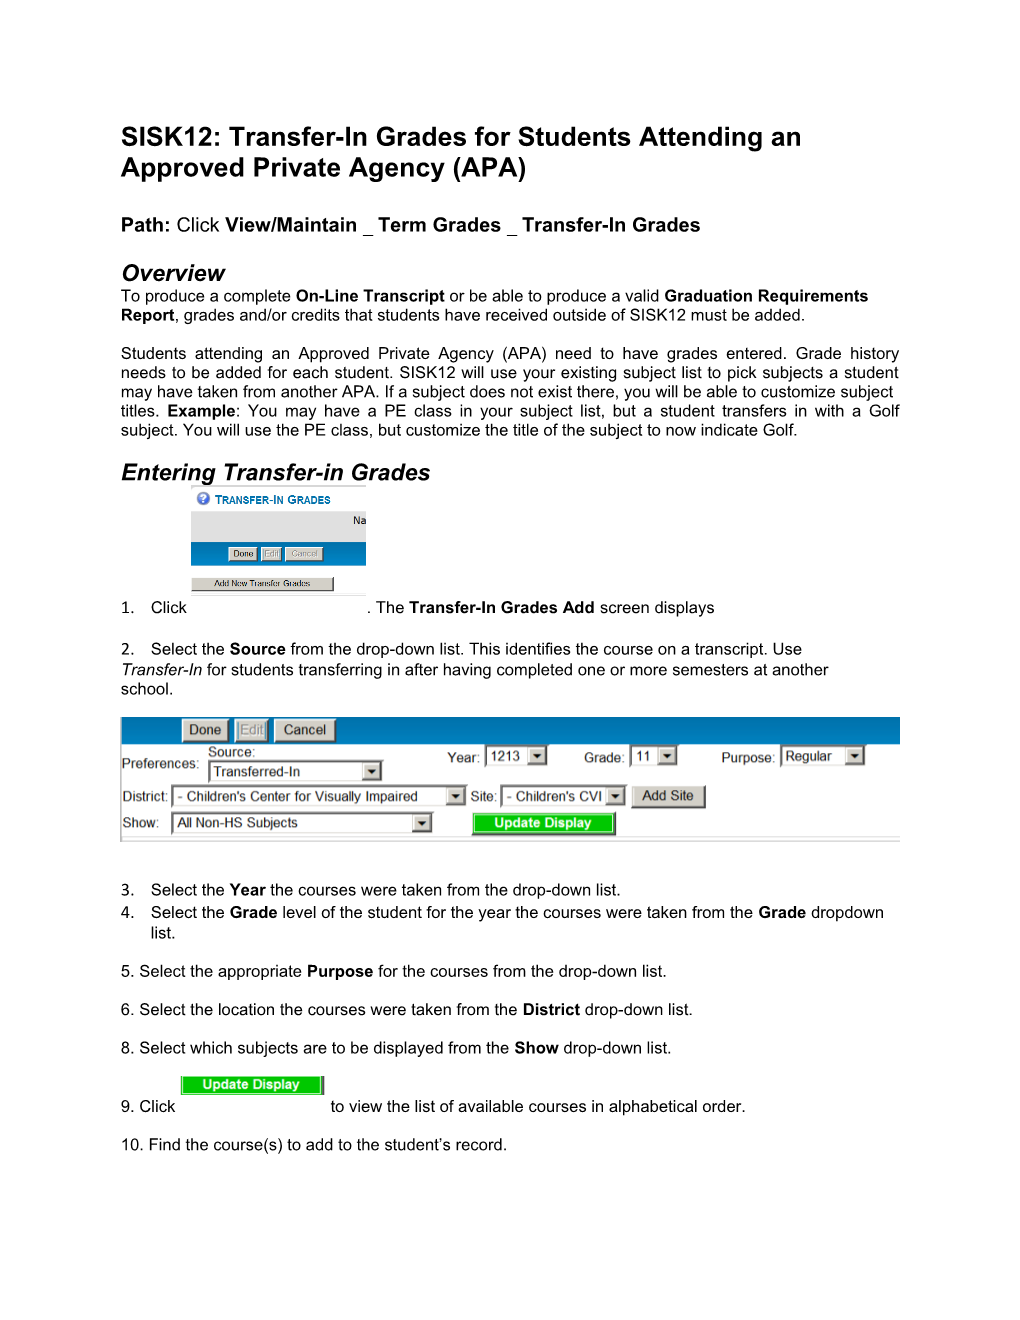 SISK12: Transfer-In Grades for Students Attending an Approved Private Agency (APA)